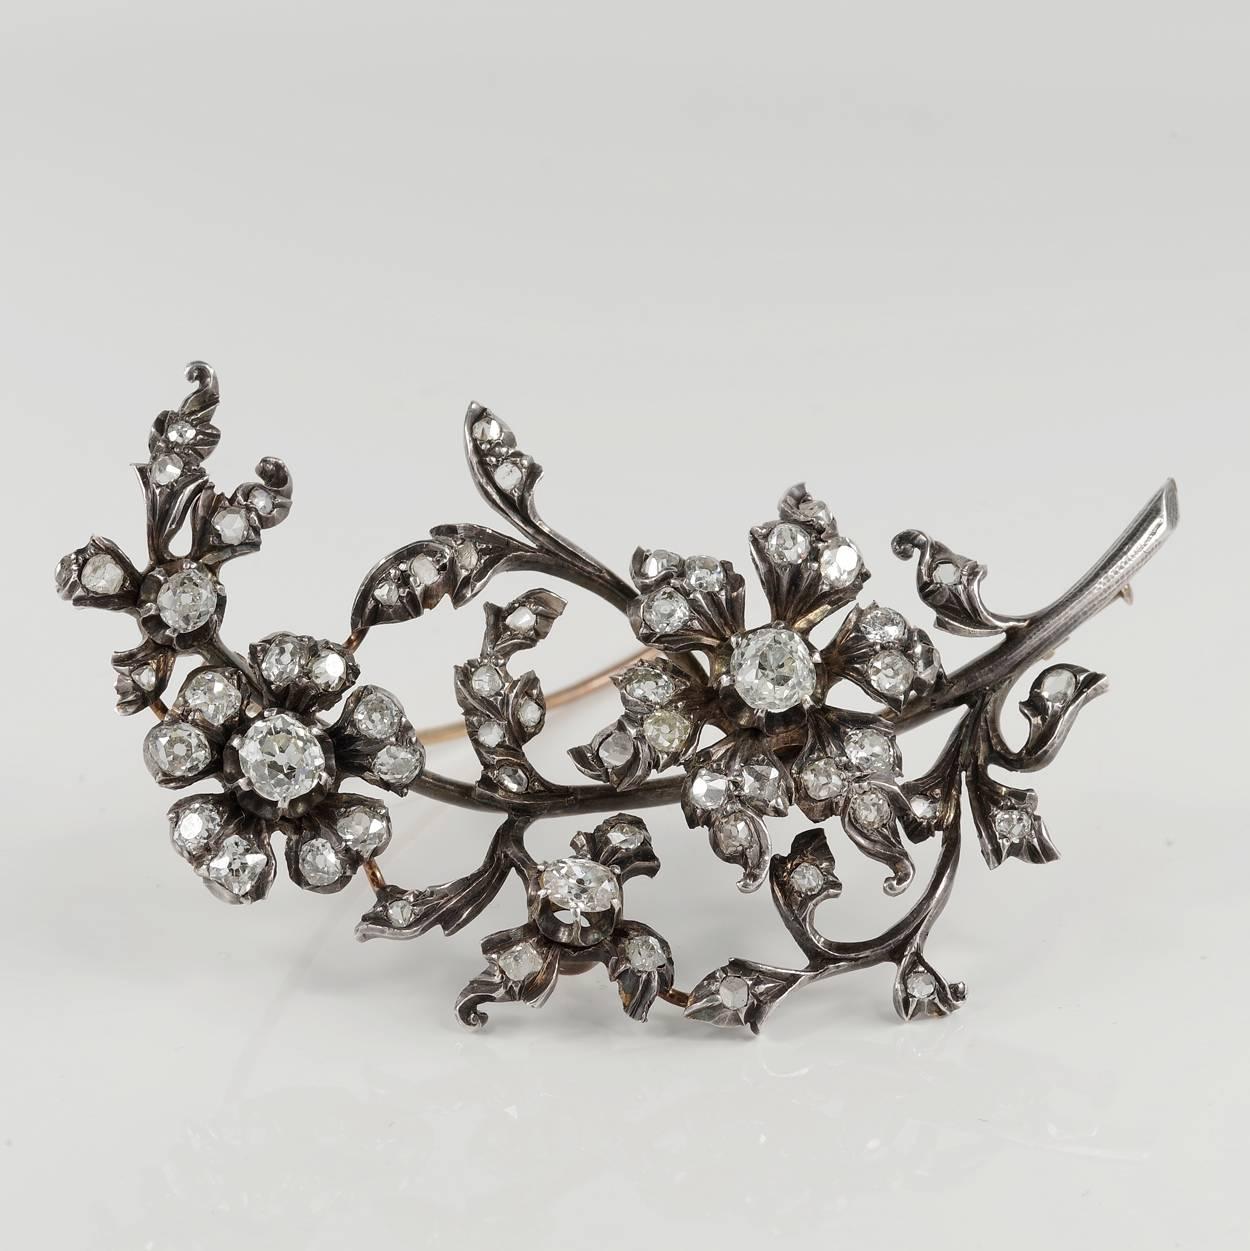 Early Victorian, magnificent floral spray brooch in a remarkable and impressive content of old cut Diamonds between old mine cut set onto flowers and rose cut Diamonds set on the leaf work.
Crafted in 15 KT gold with silver top as for the period -